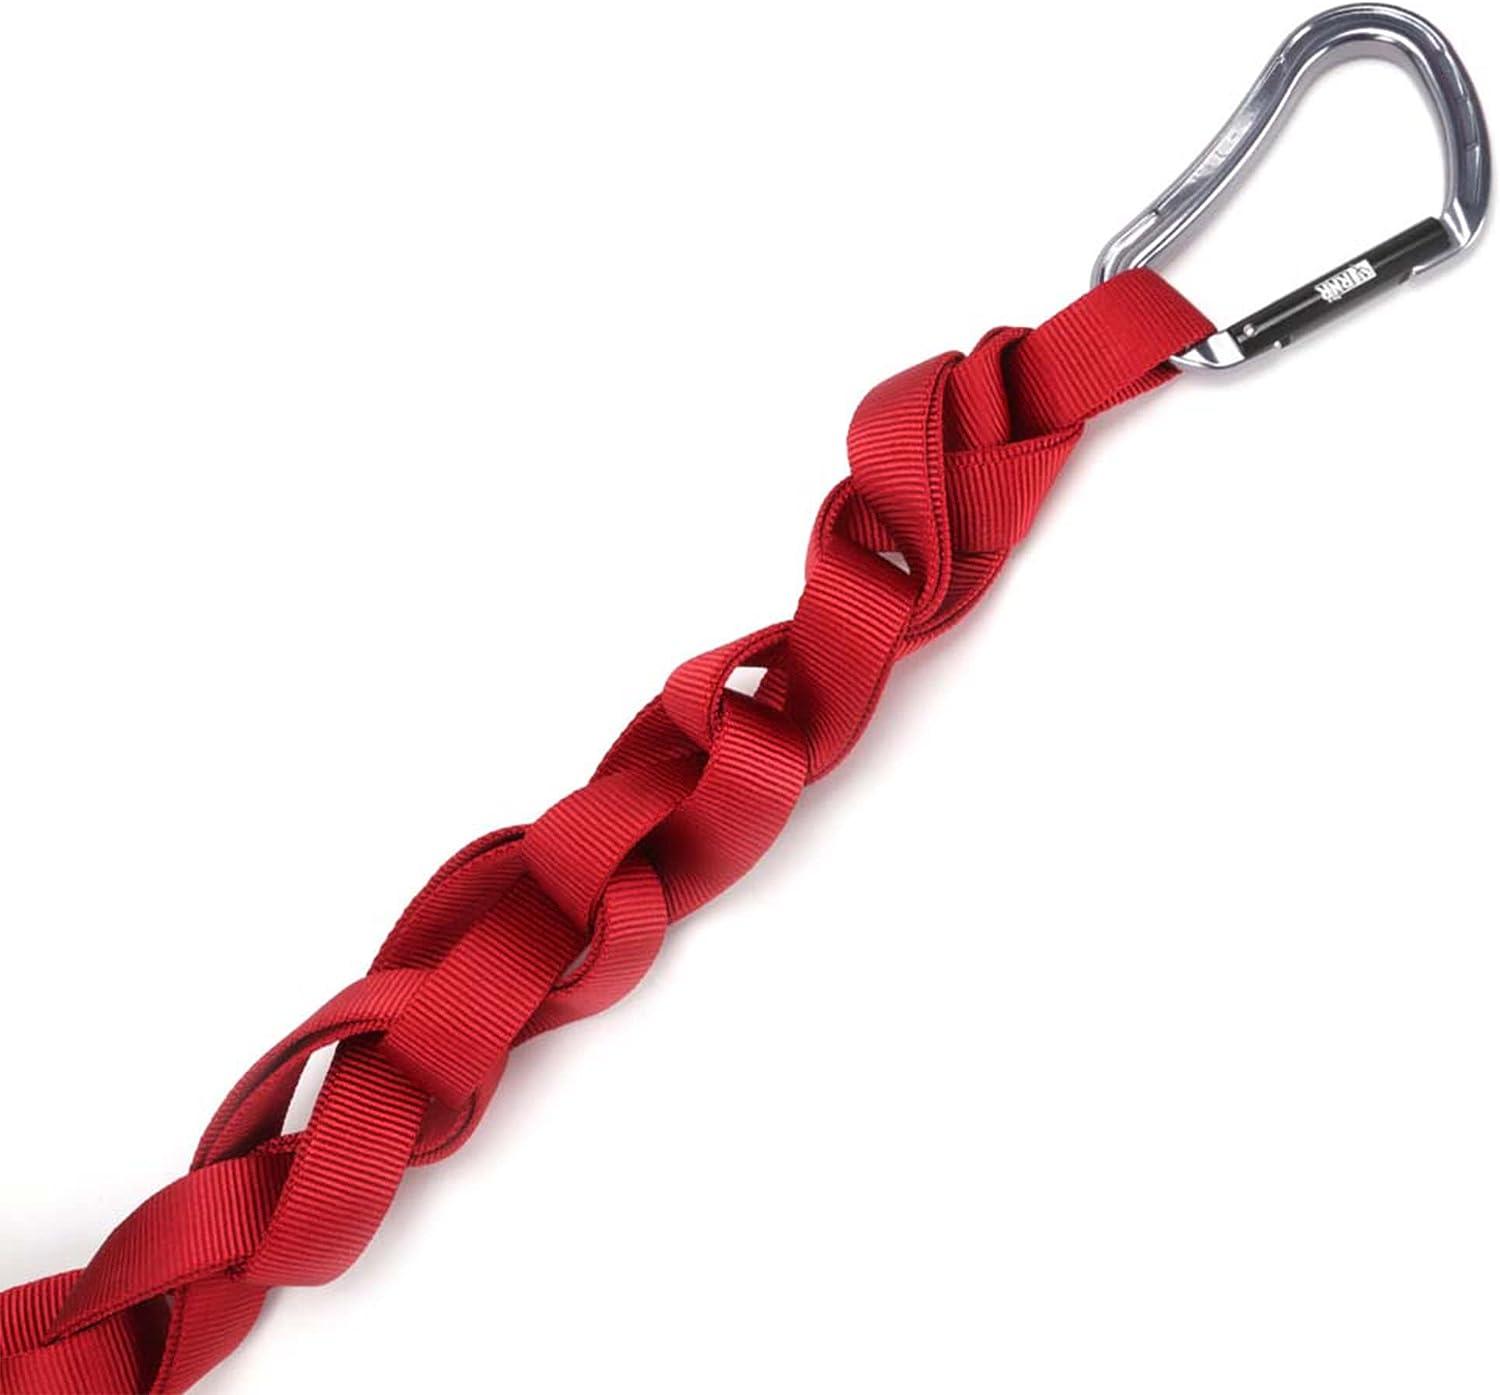 Rock N Rescue 20-Foot Webbing and Carabiner Combo - Heavy-Duty Tubular Nylon, Made in USA, Firefighter and Rescue Gear